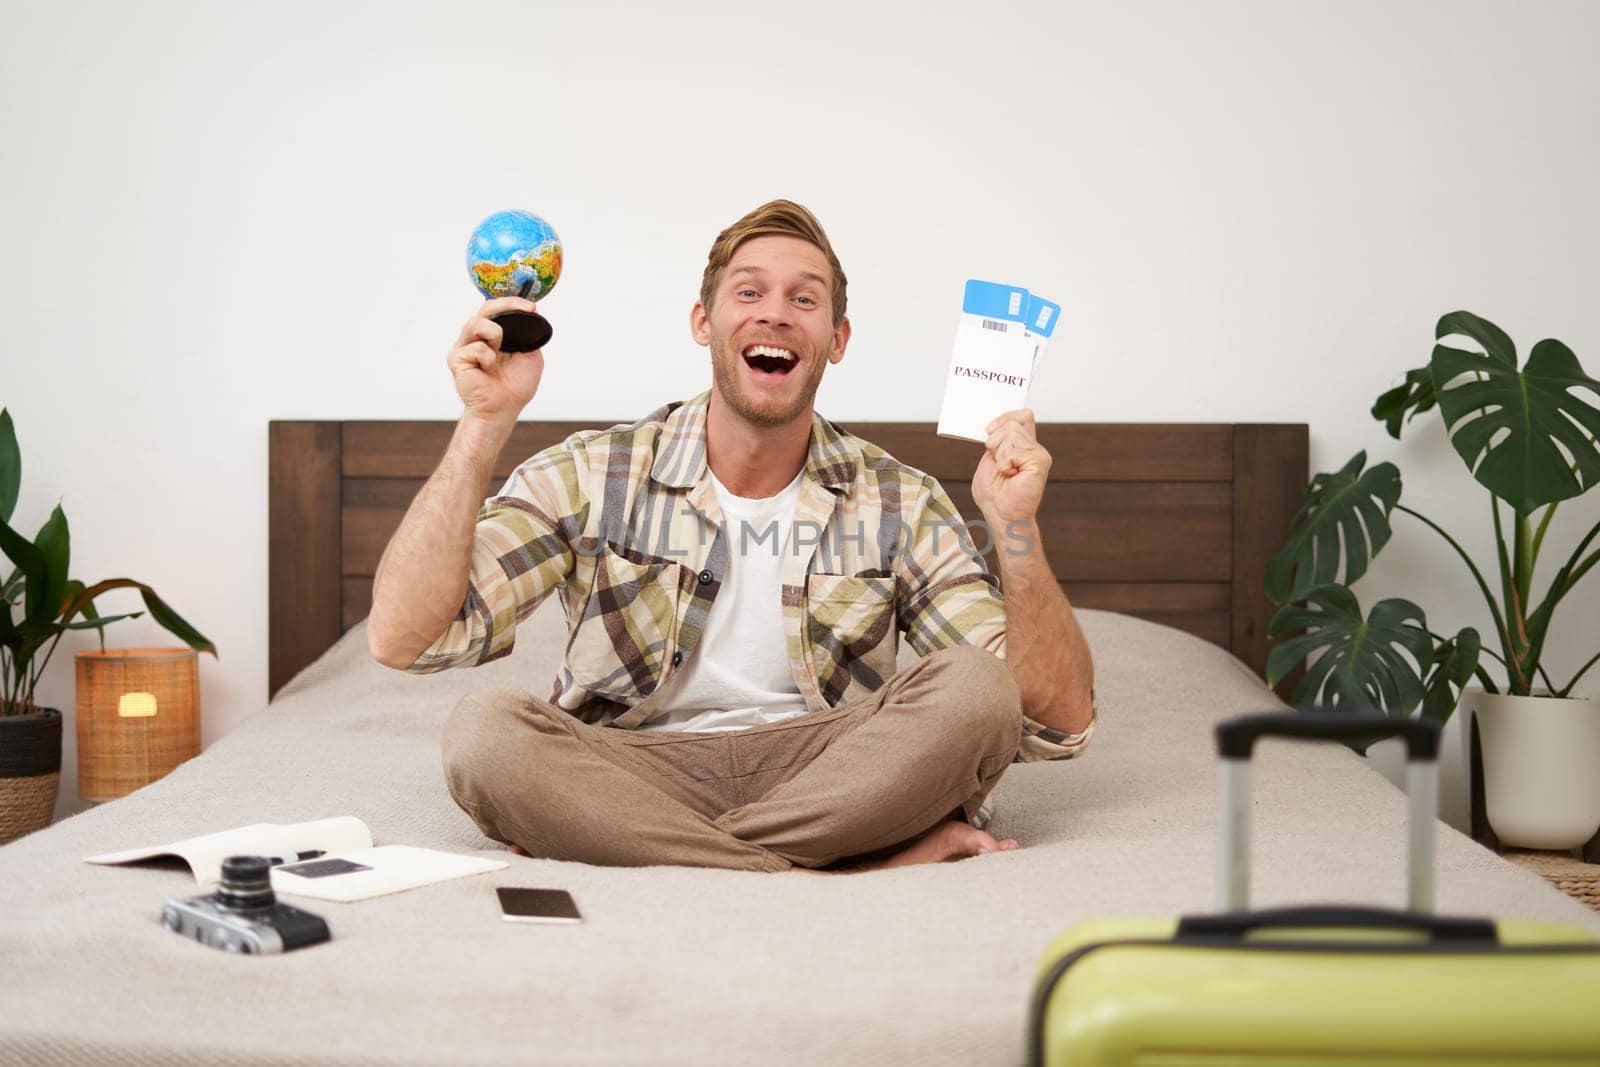 Portrait of happy guy, tourist goes on vacation abroad, holds globe and plane ticket, excited about his holiday, sits on bed with smiling, enthusiastic face expression. Copy space